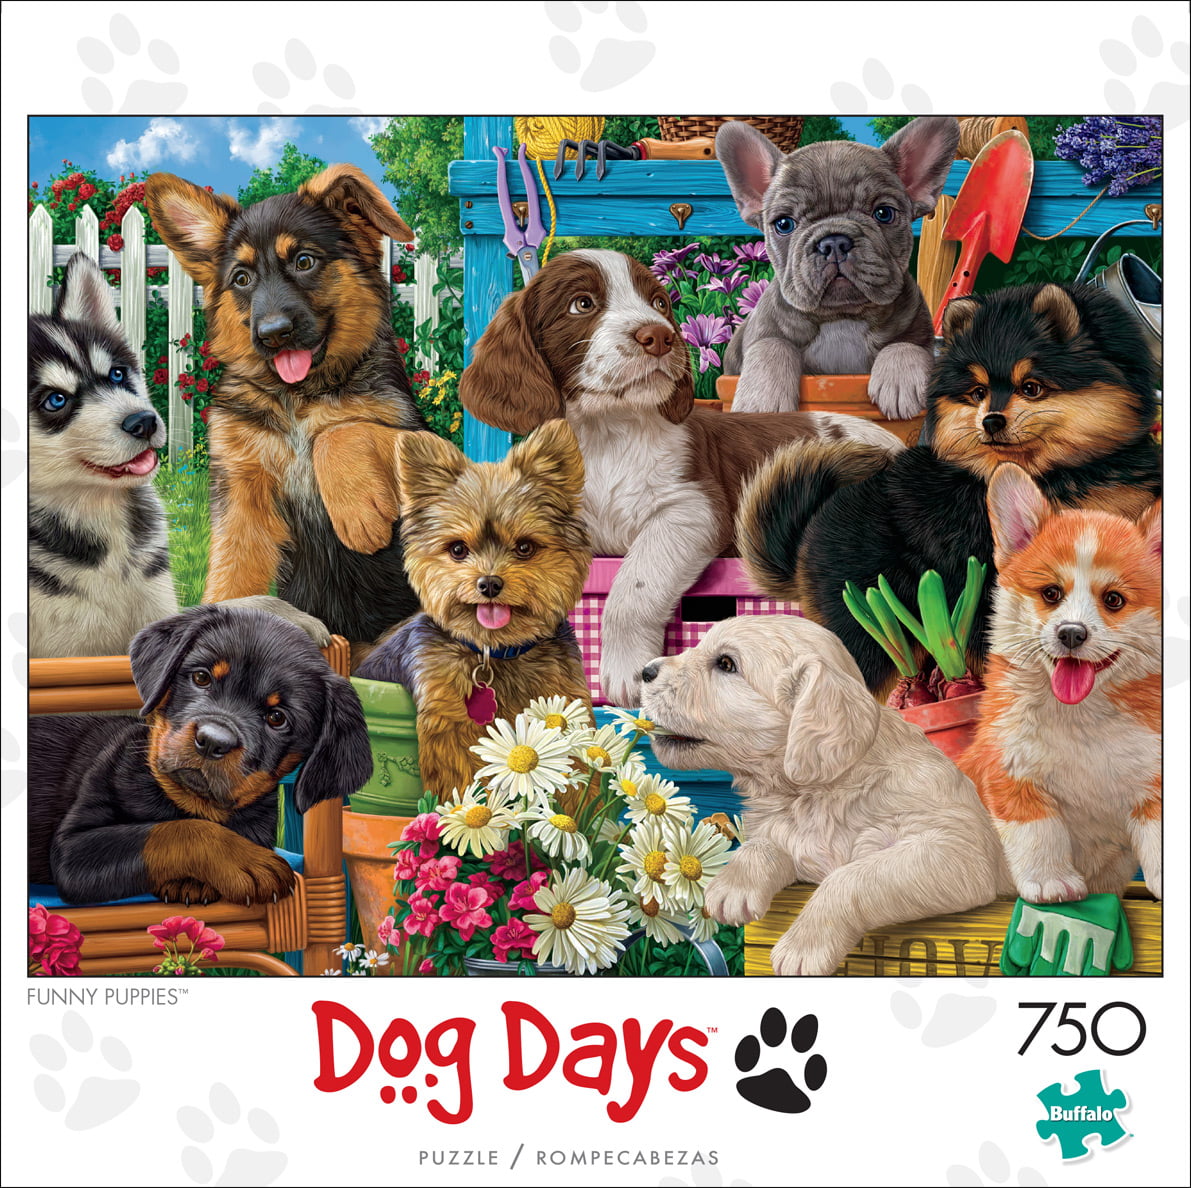 Buffalo Games - Dog Days - Funny Puppies - 750 Piece Jigsaw Puzzle ...